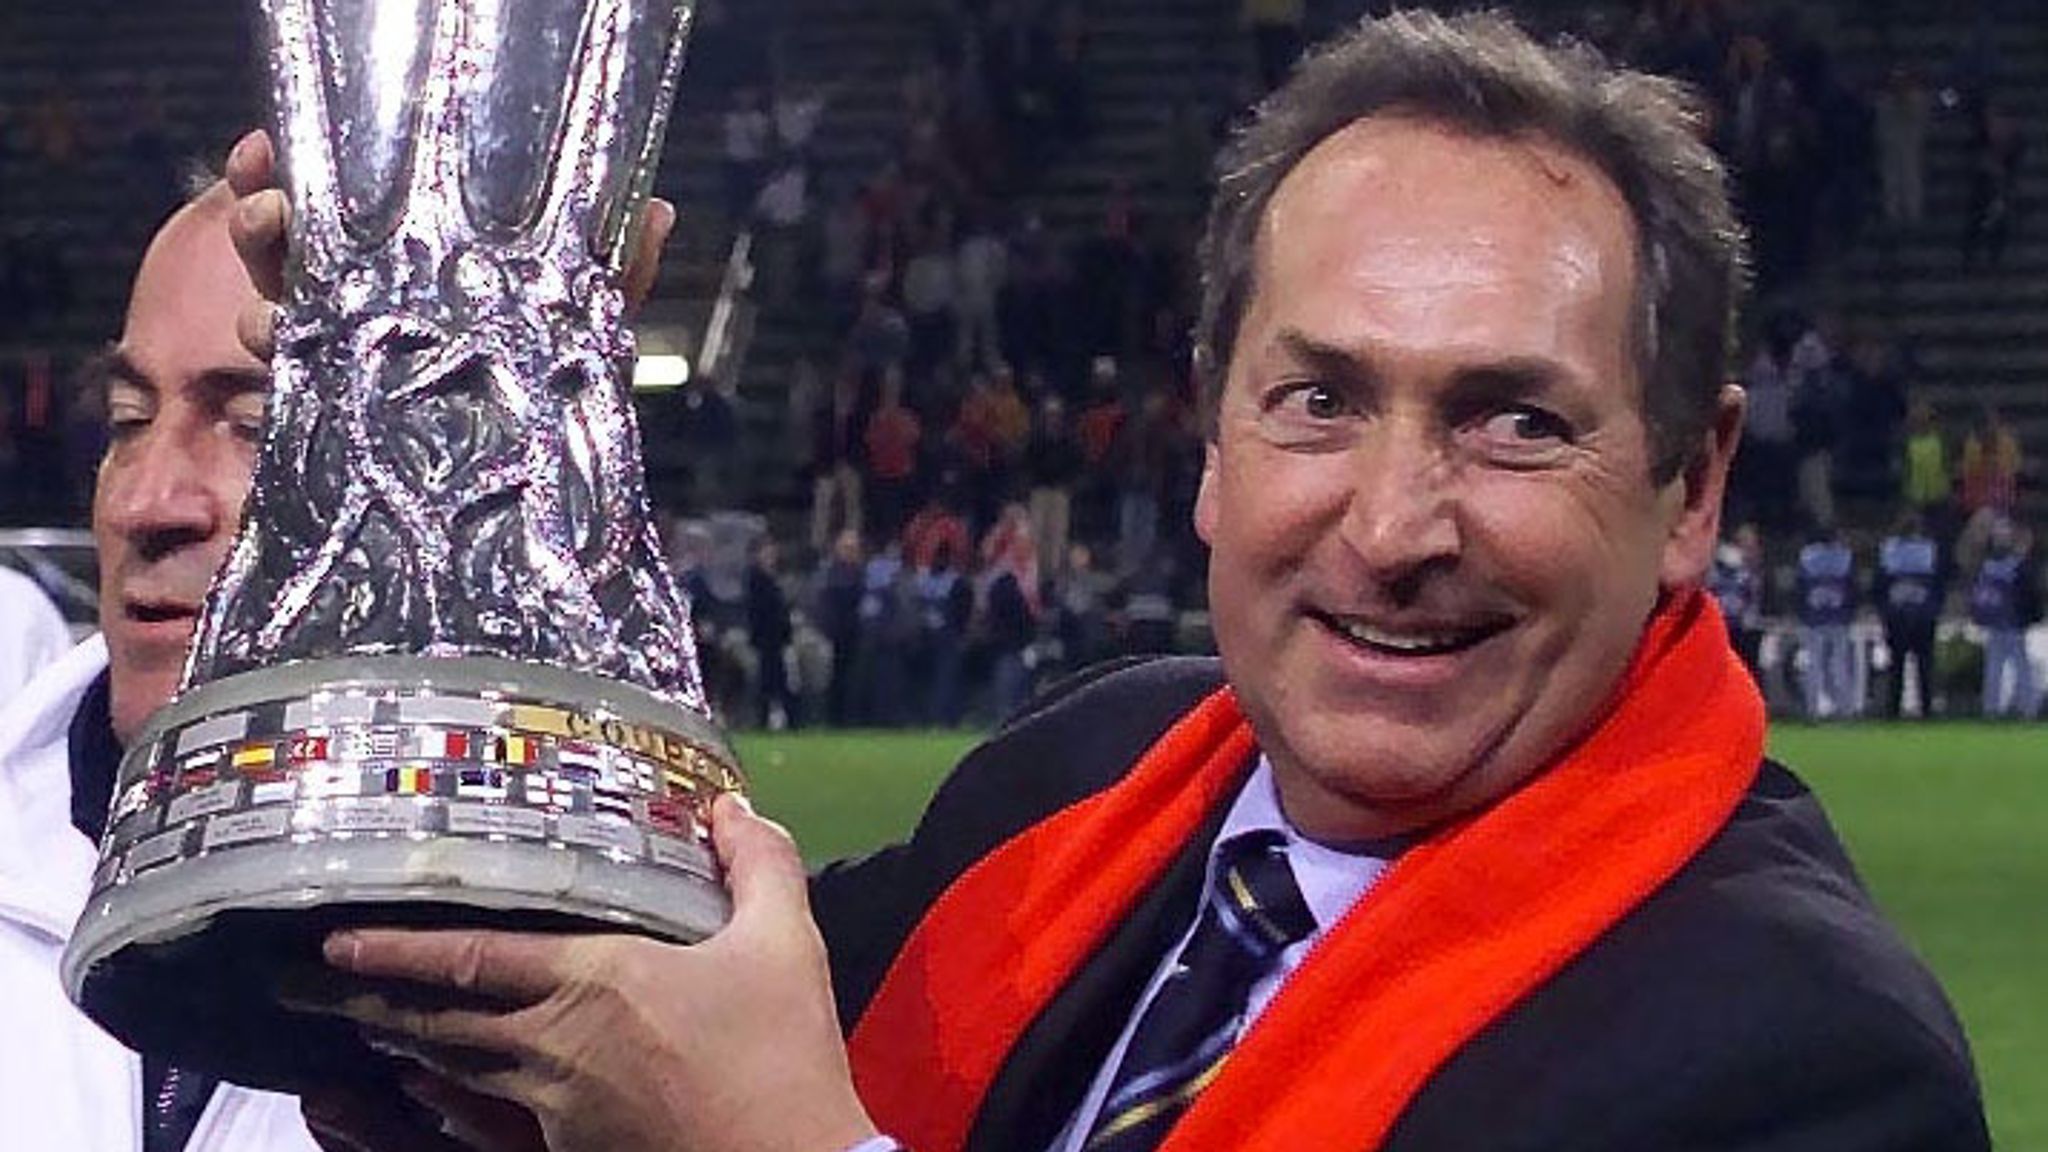 Gerard Houllier with the UEFA Cup after Liverpool defeated Alaves 5-4 under the Golden Goal rule in 2001[Image Source:Sky news ]